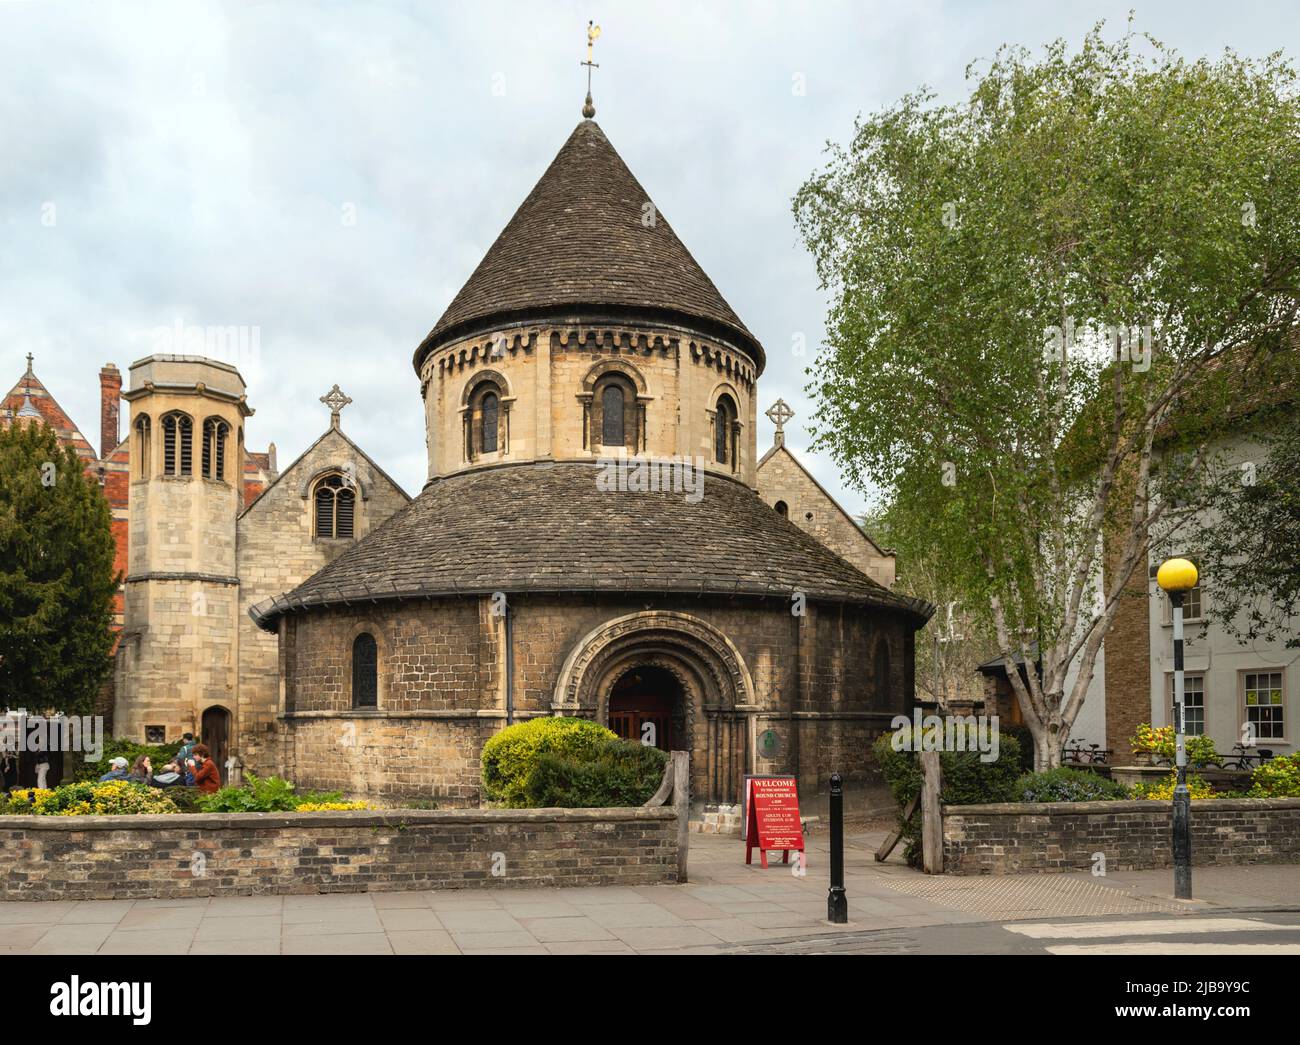 The Church of the Holy Sepulchre, a.k.a. The Round Church, dating from the 12th century, Cambridge, Cambridgeshire, England, UK. Stock Photo